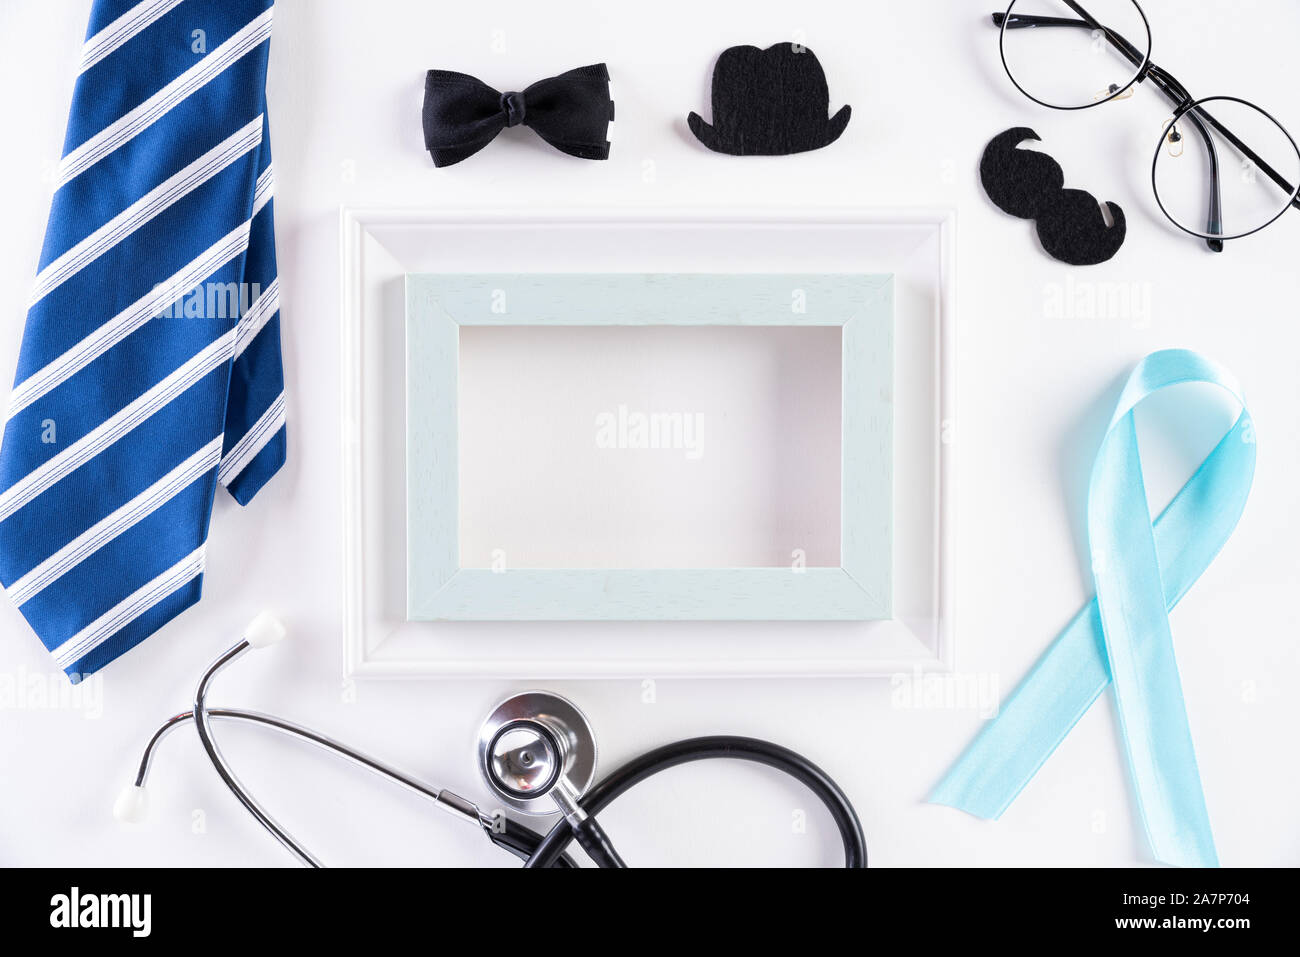 Blue ribbon with tie and stethoscope on white background representing an annual event during the month of November to raise awareness of men's health Stock Photo